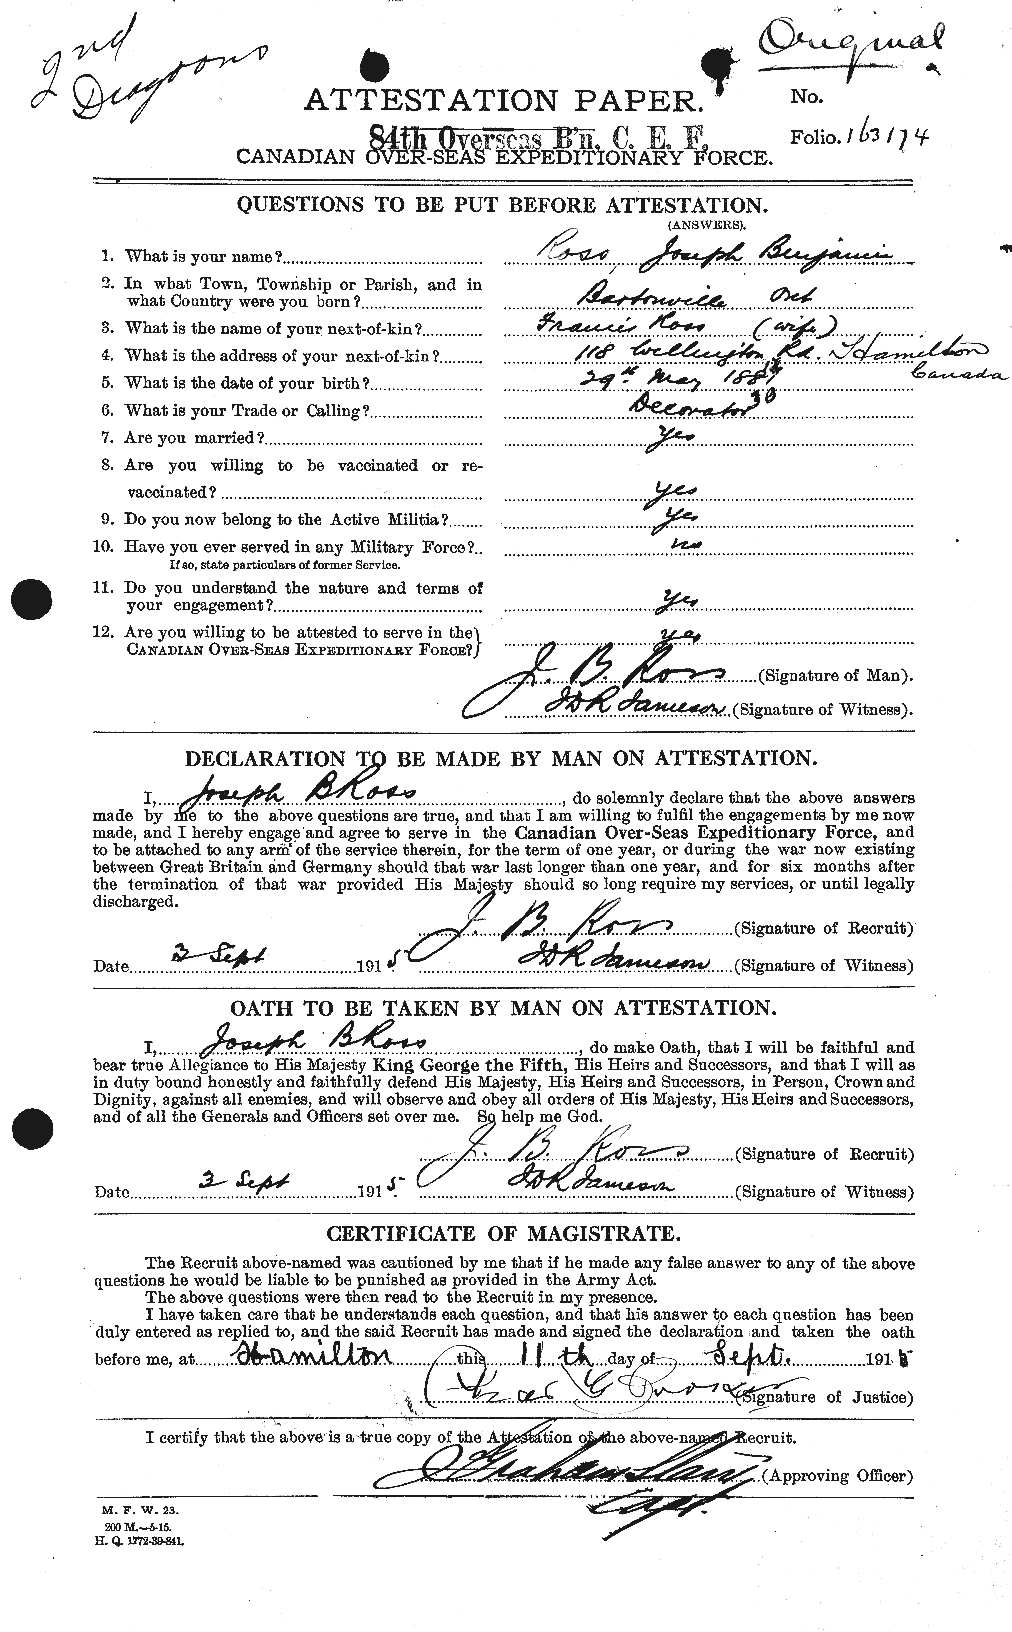 Personnel Records of the First World War - CEF 614961a